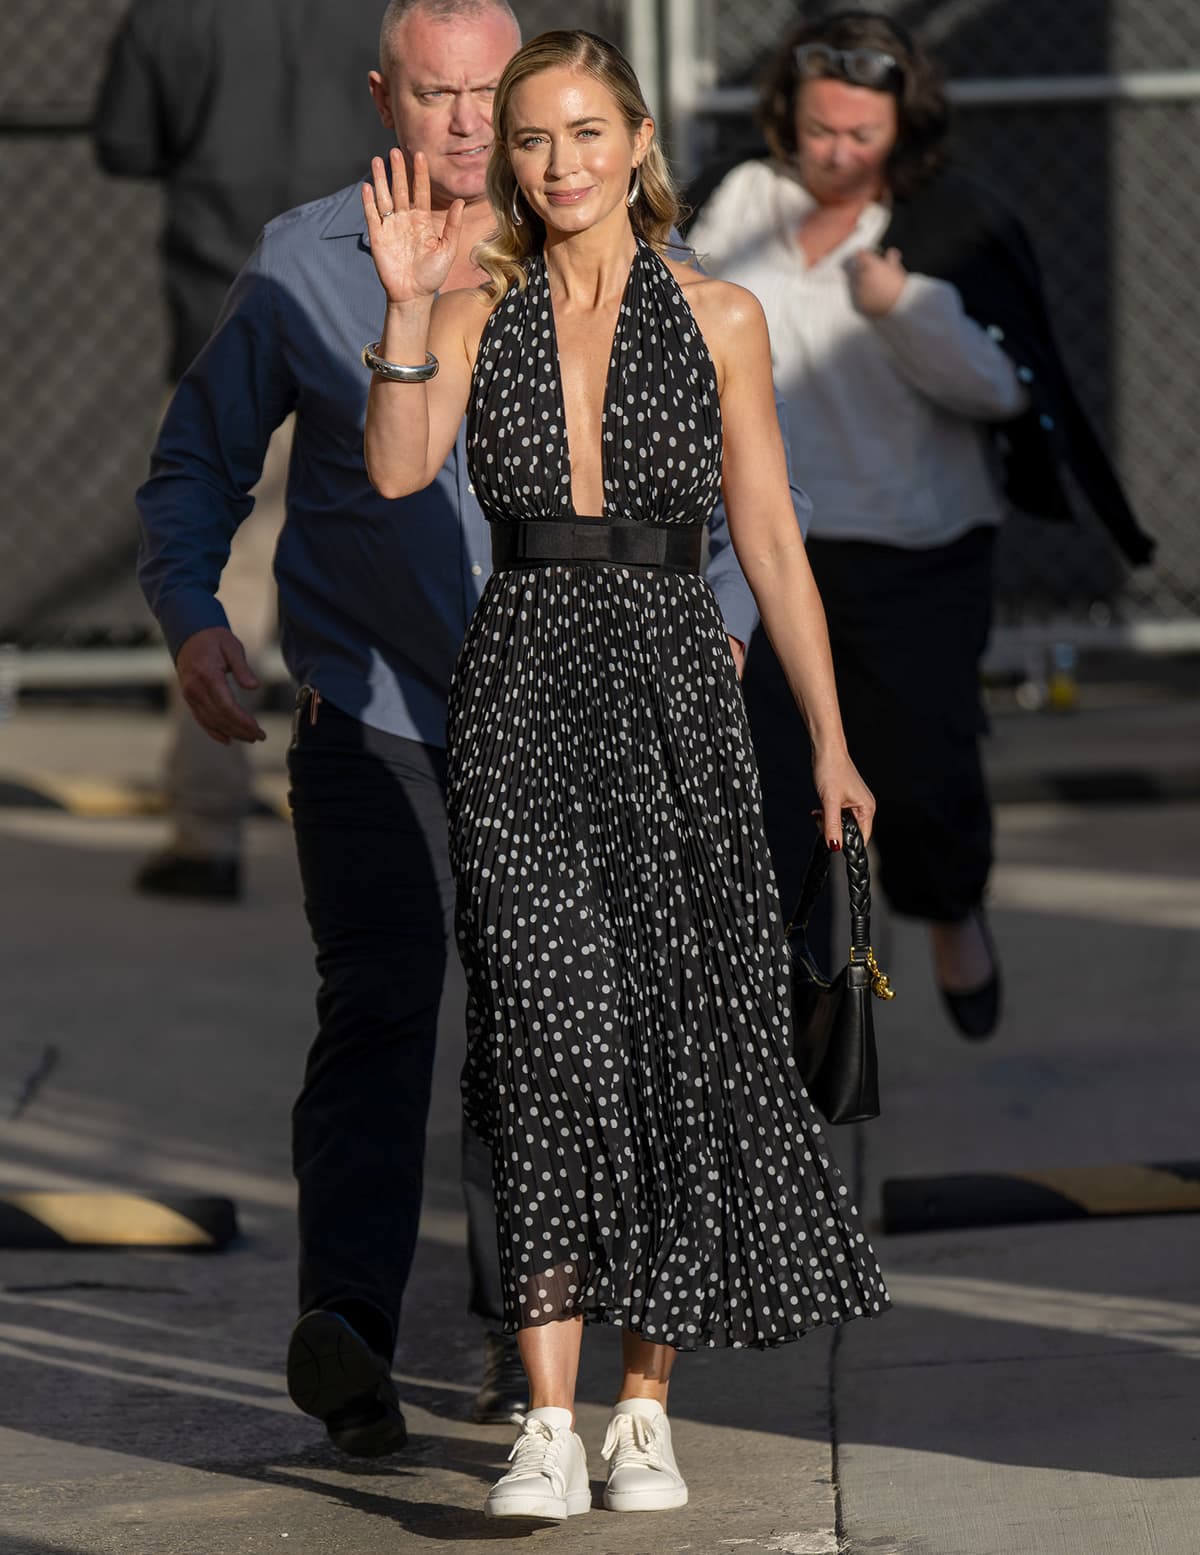 Emily Blunt wows in a plunging polka-dot dress by Dolce & Gabbana ahead of her appearance on Jimmy Kimmel Live on February 23, 2024